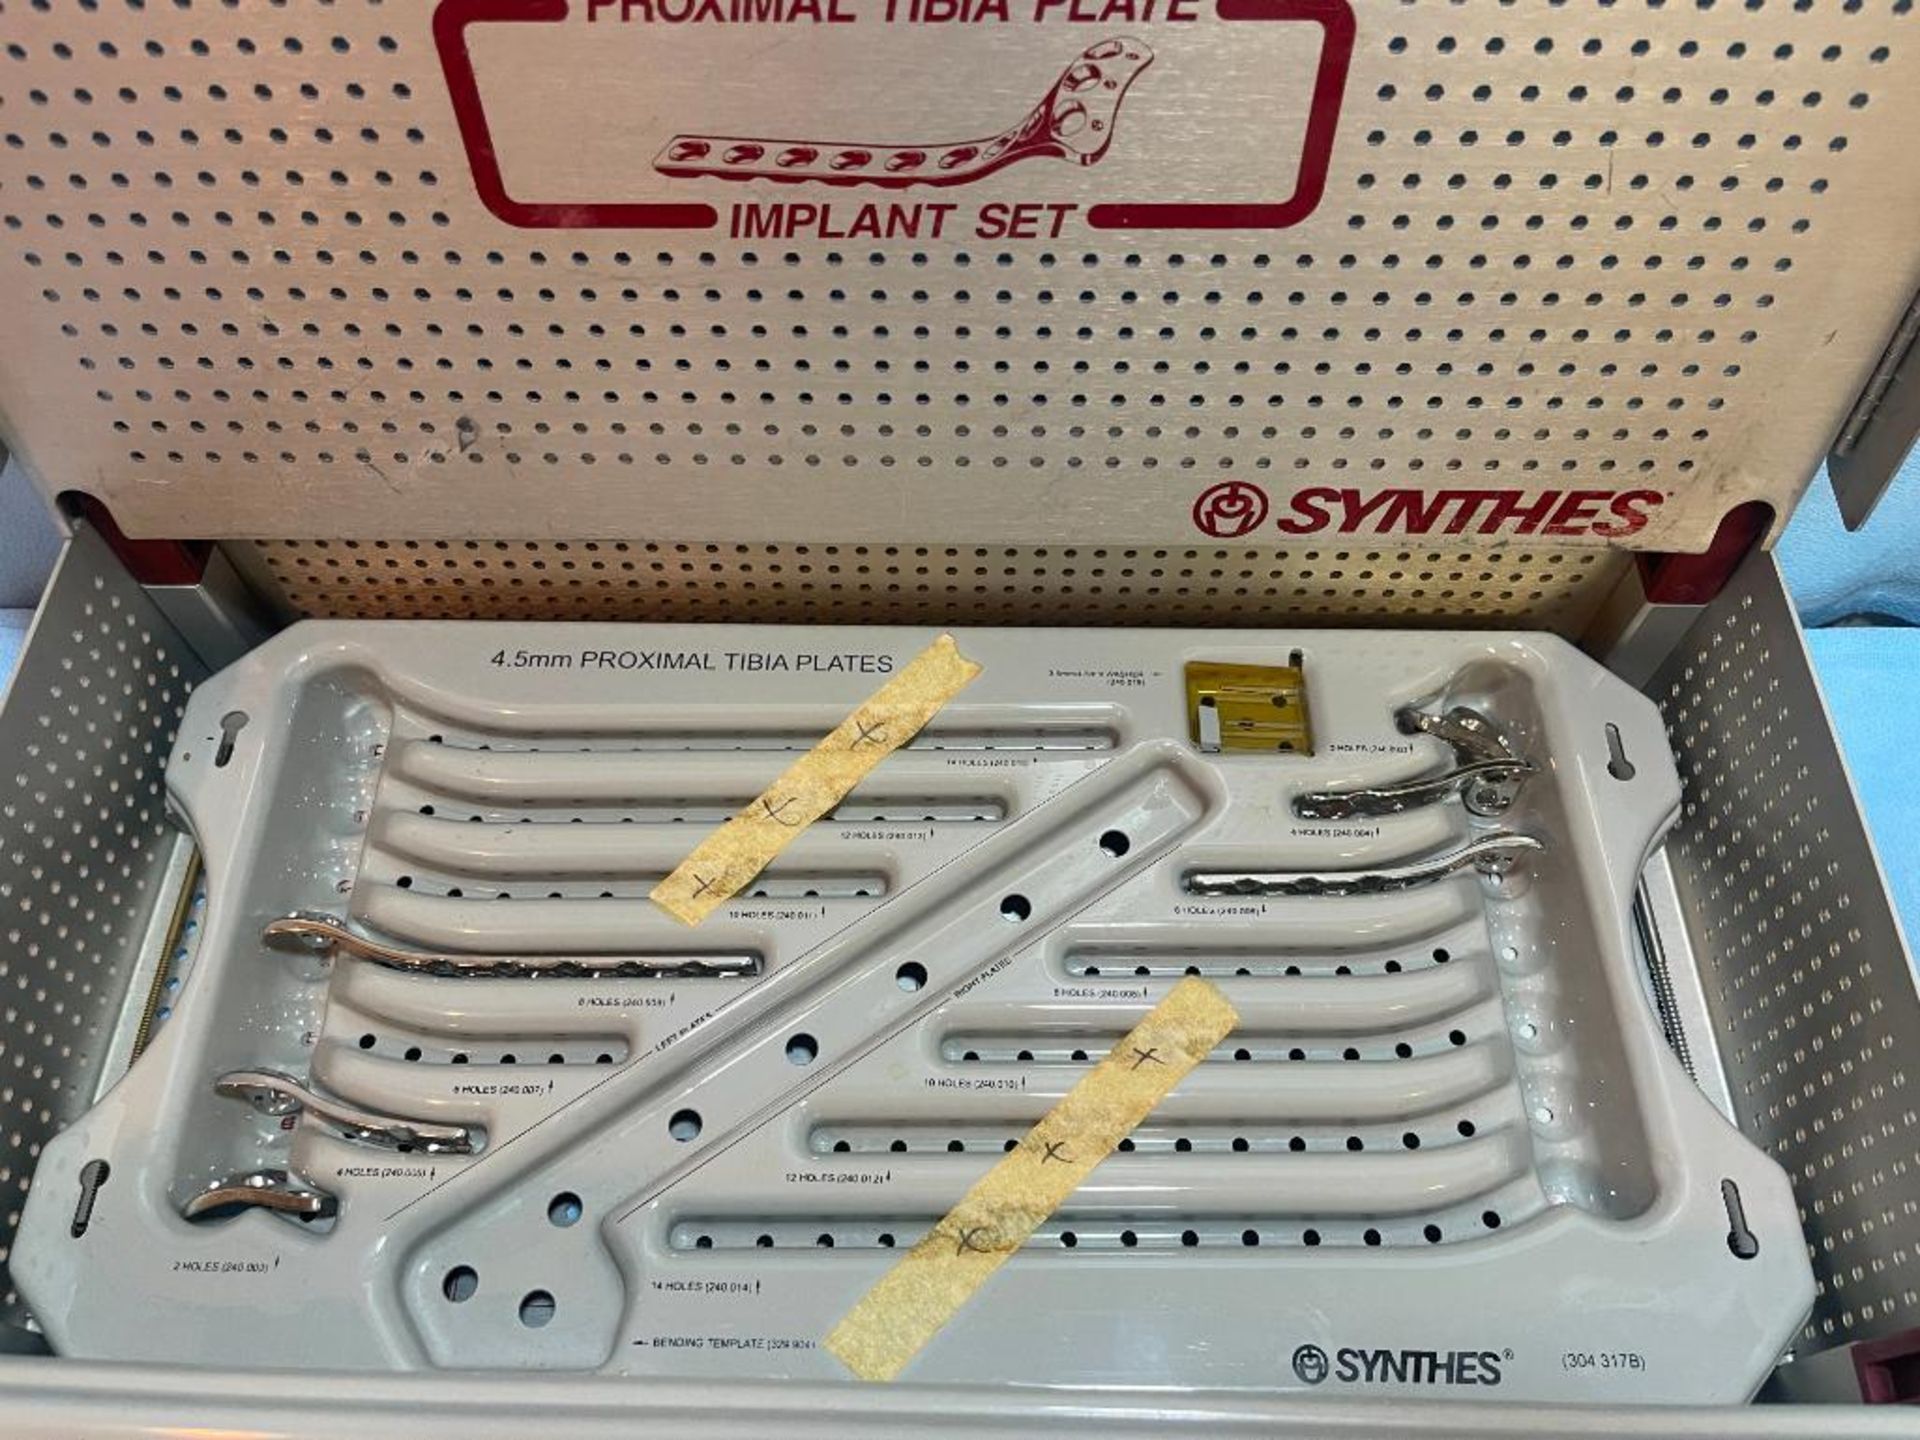 SYNTHES PROXIMAL TIBIA PLATE IMPLANT SET - Image 4 of 5